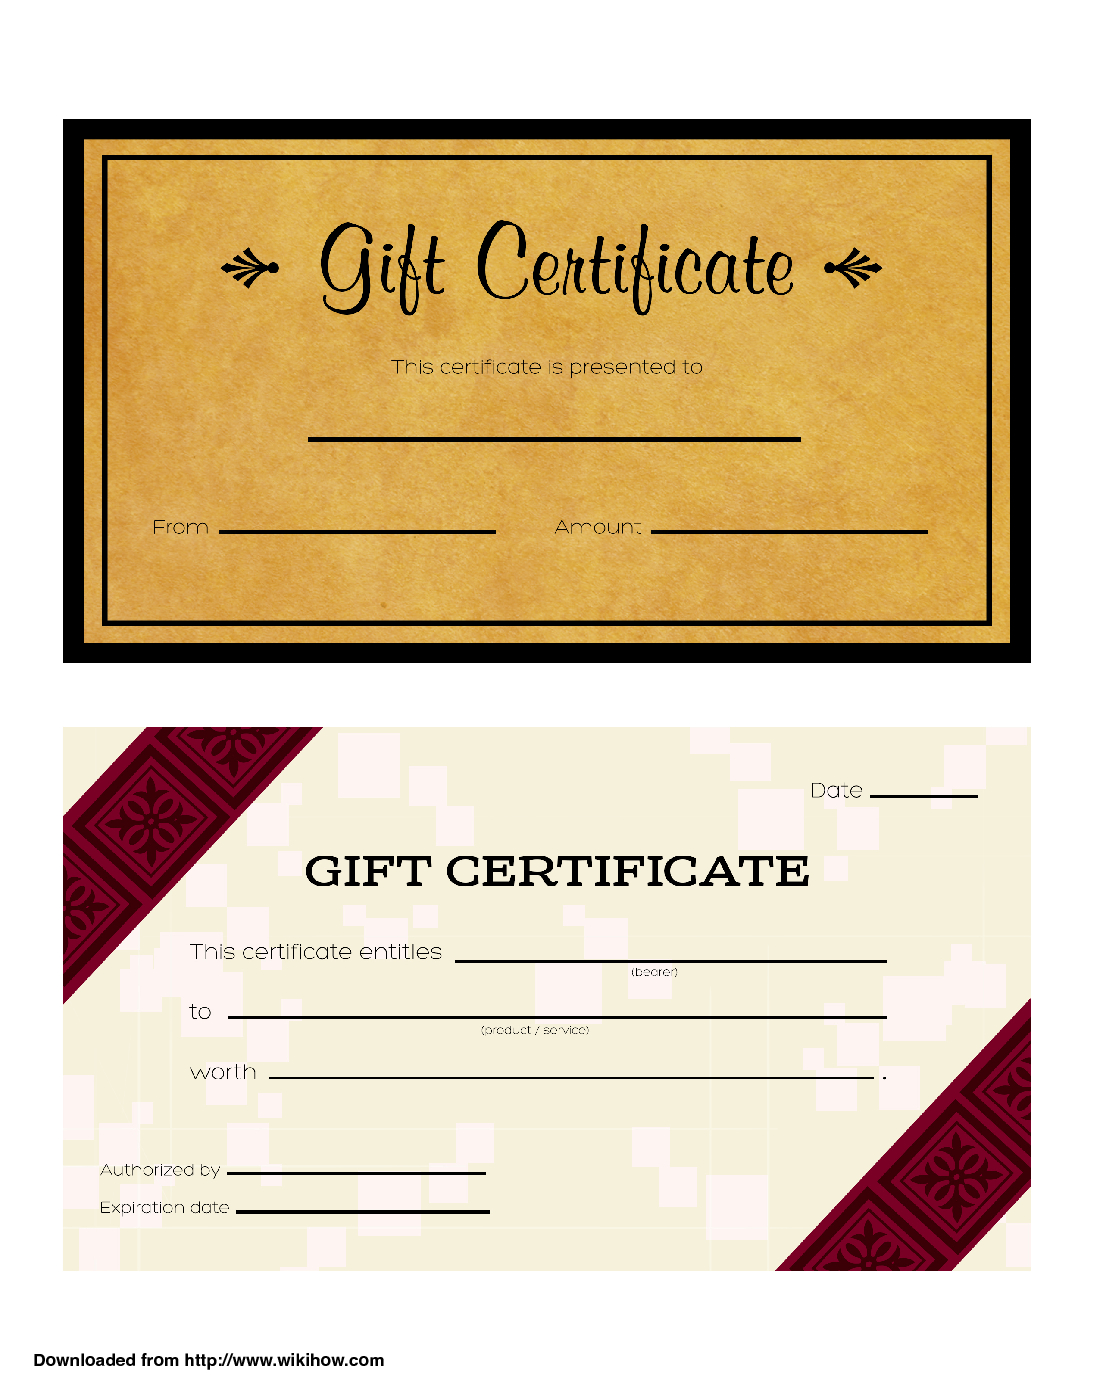 3 Ways To Make Your Own Printable Certificate – Wikihow For Present Certificate Templates